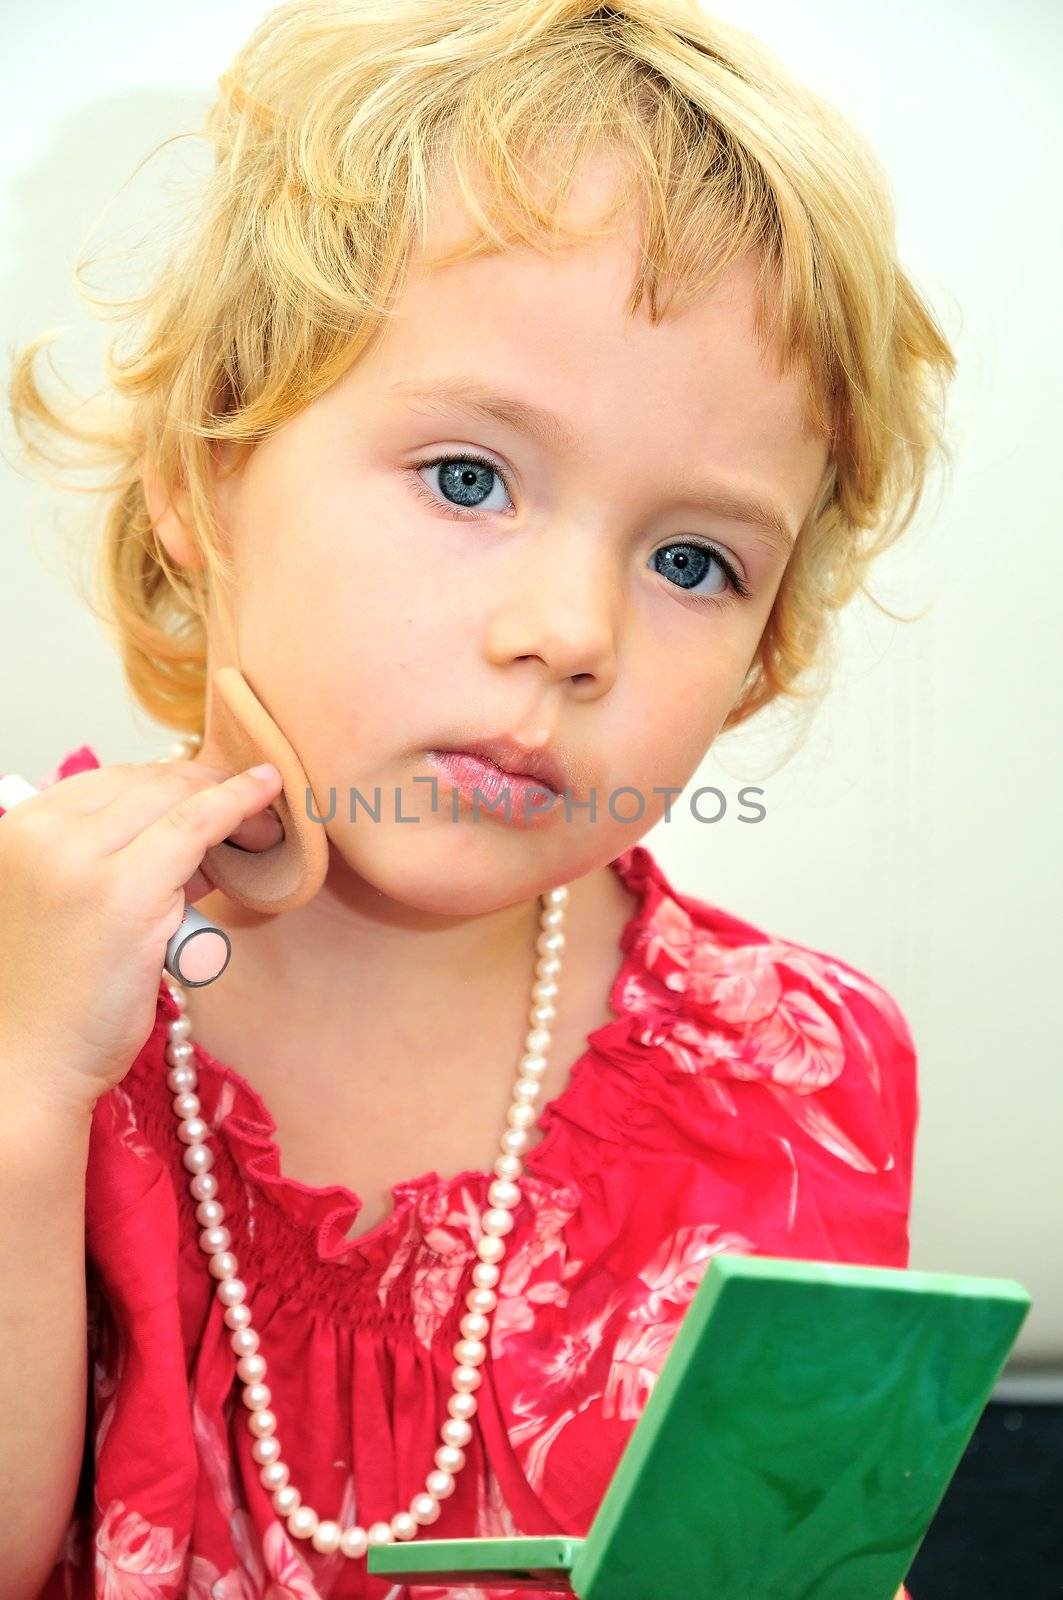 little girl using powder and lirstick she is wearing necklace